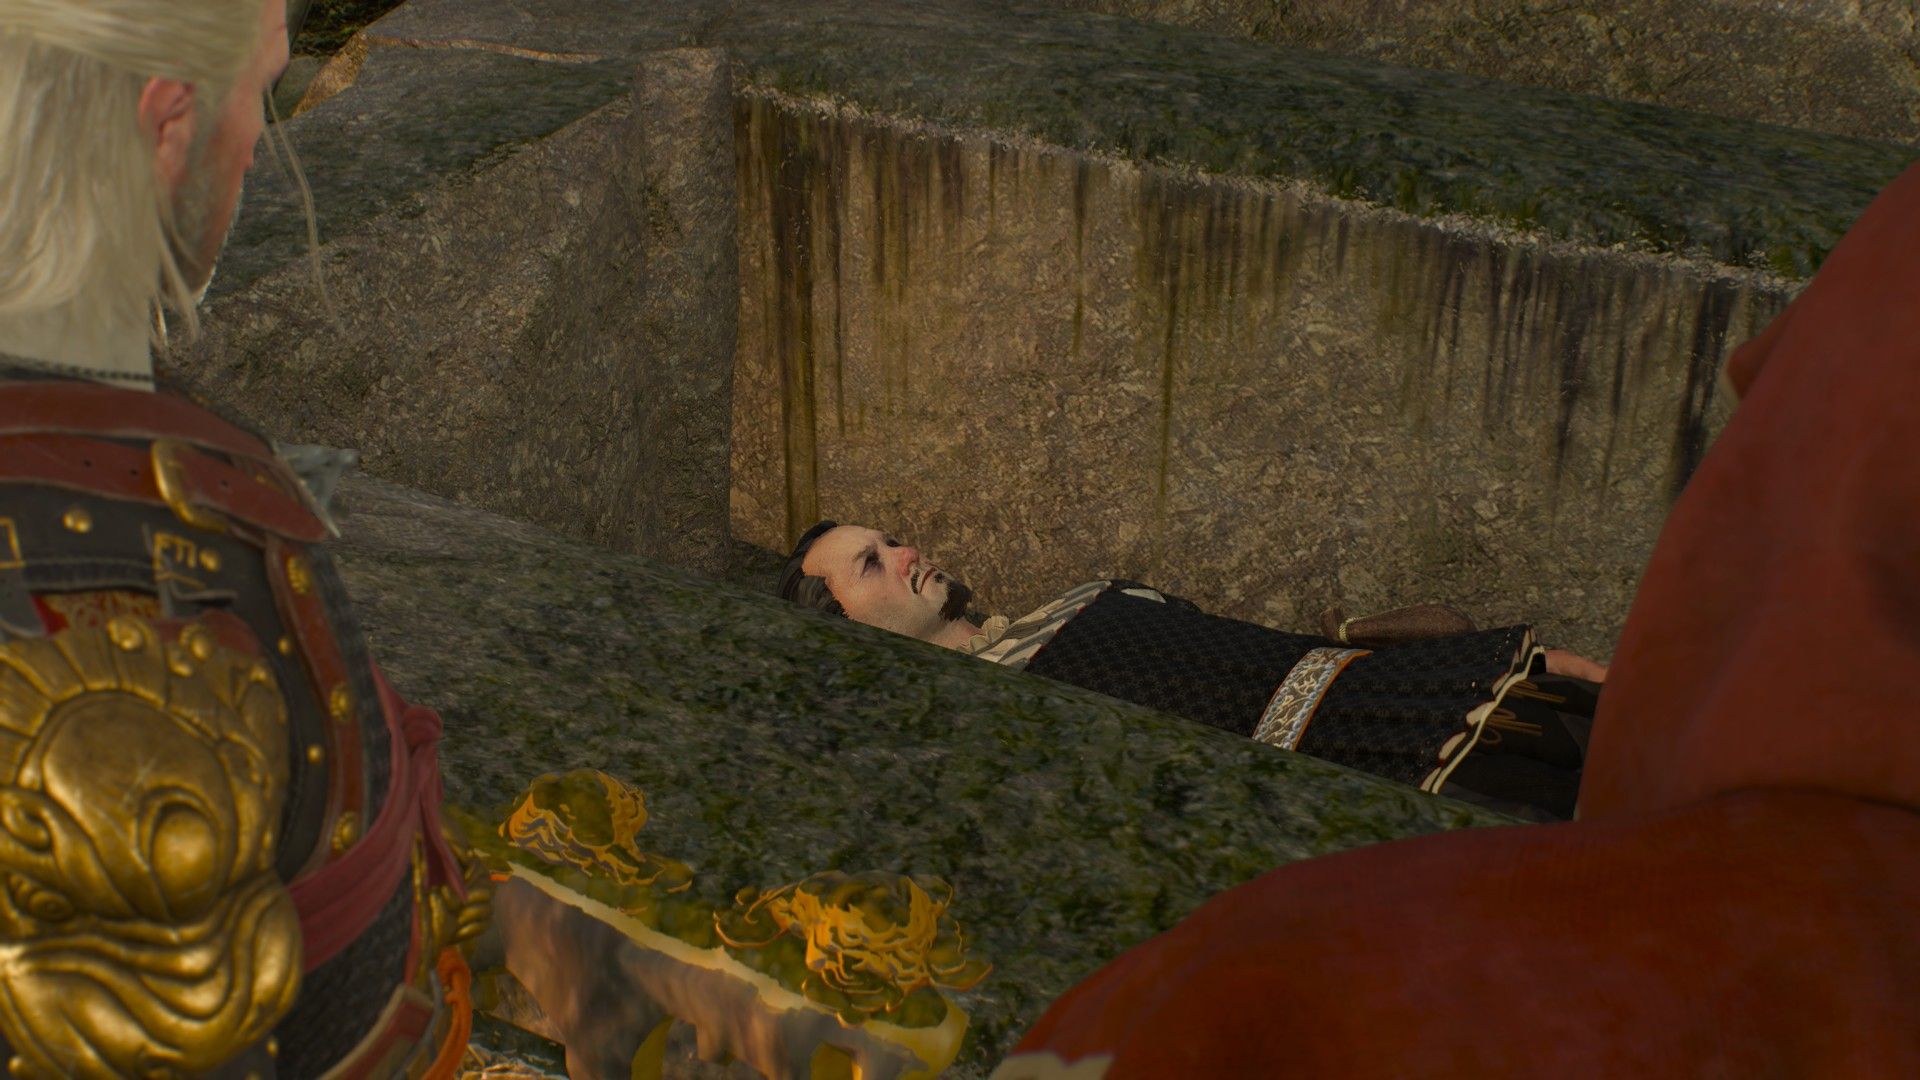 Geralt and a professor look at a finely-dressed man laying inside a large, stone sarcophagus.